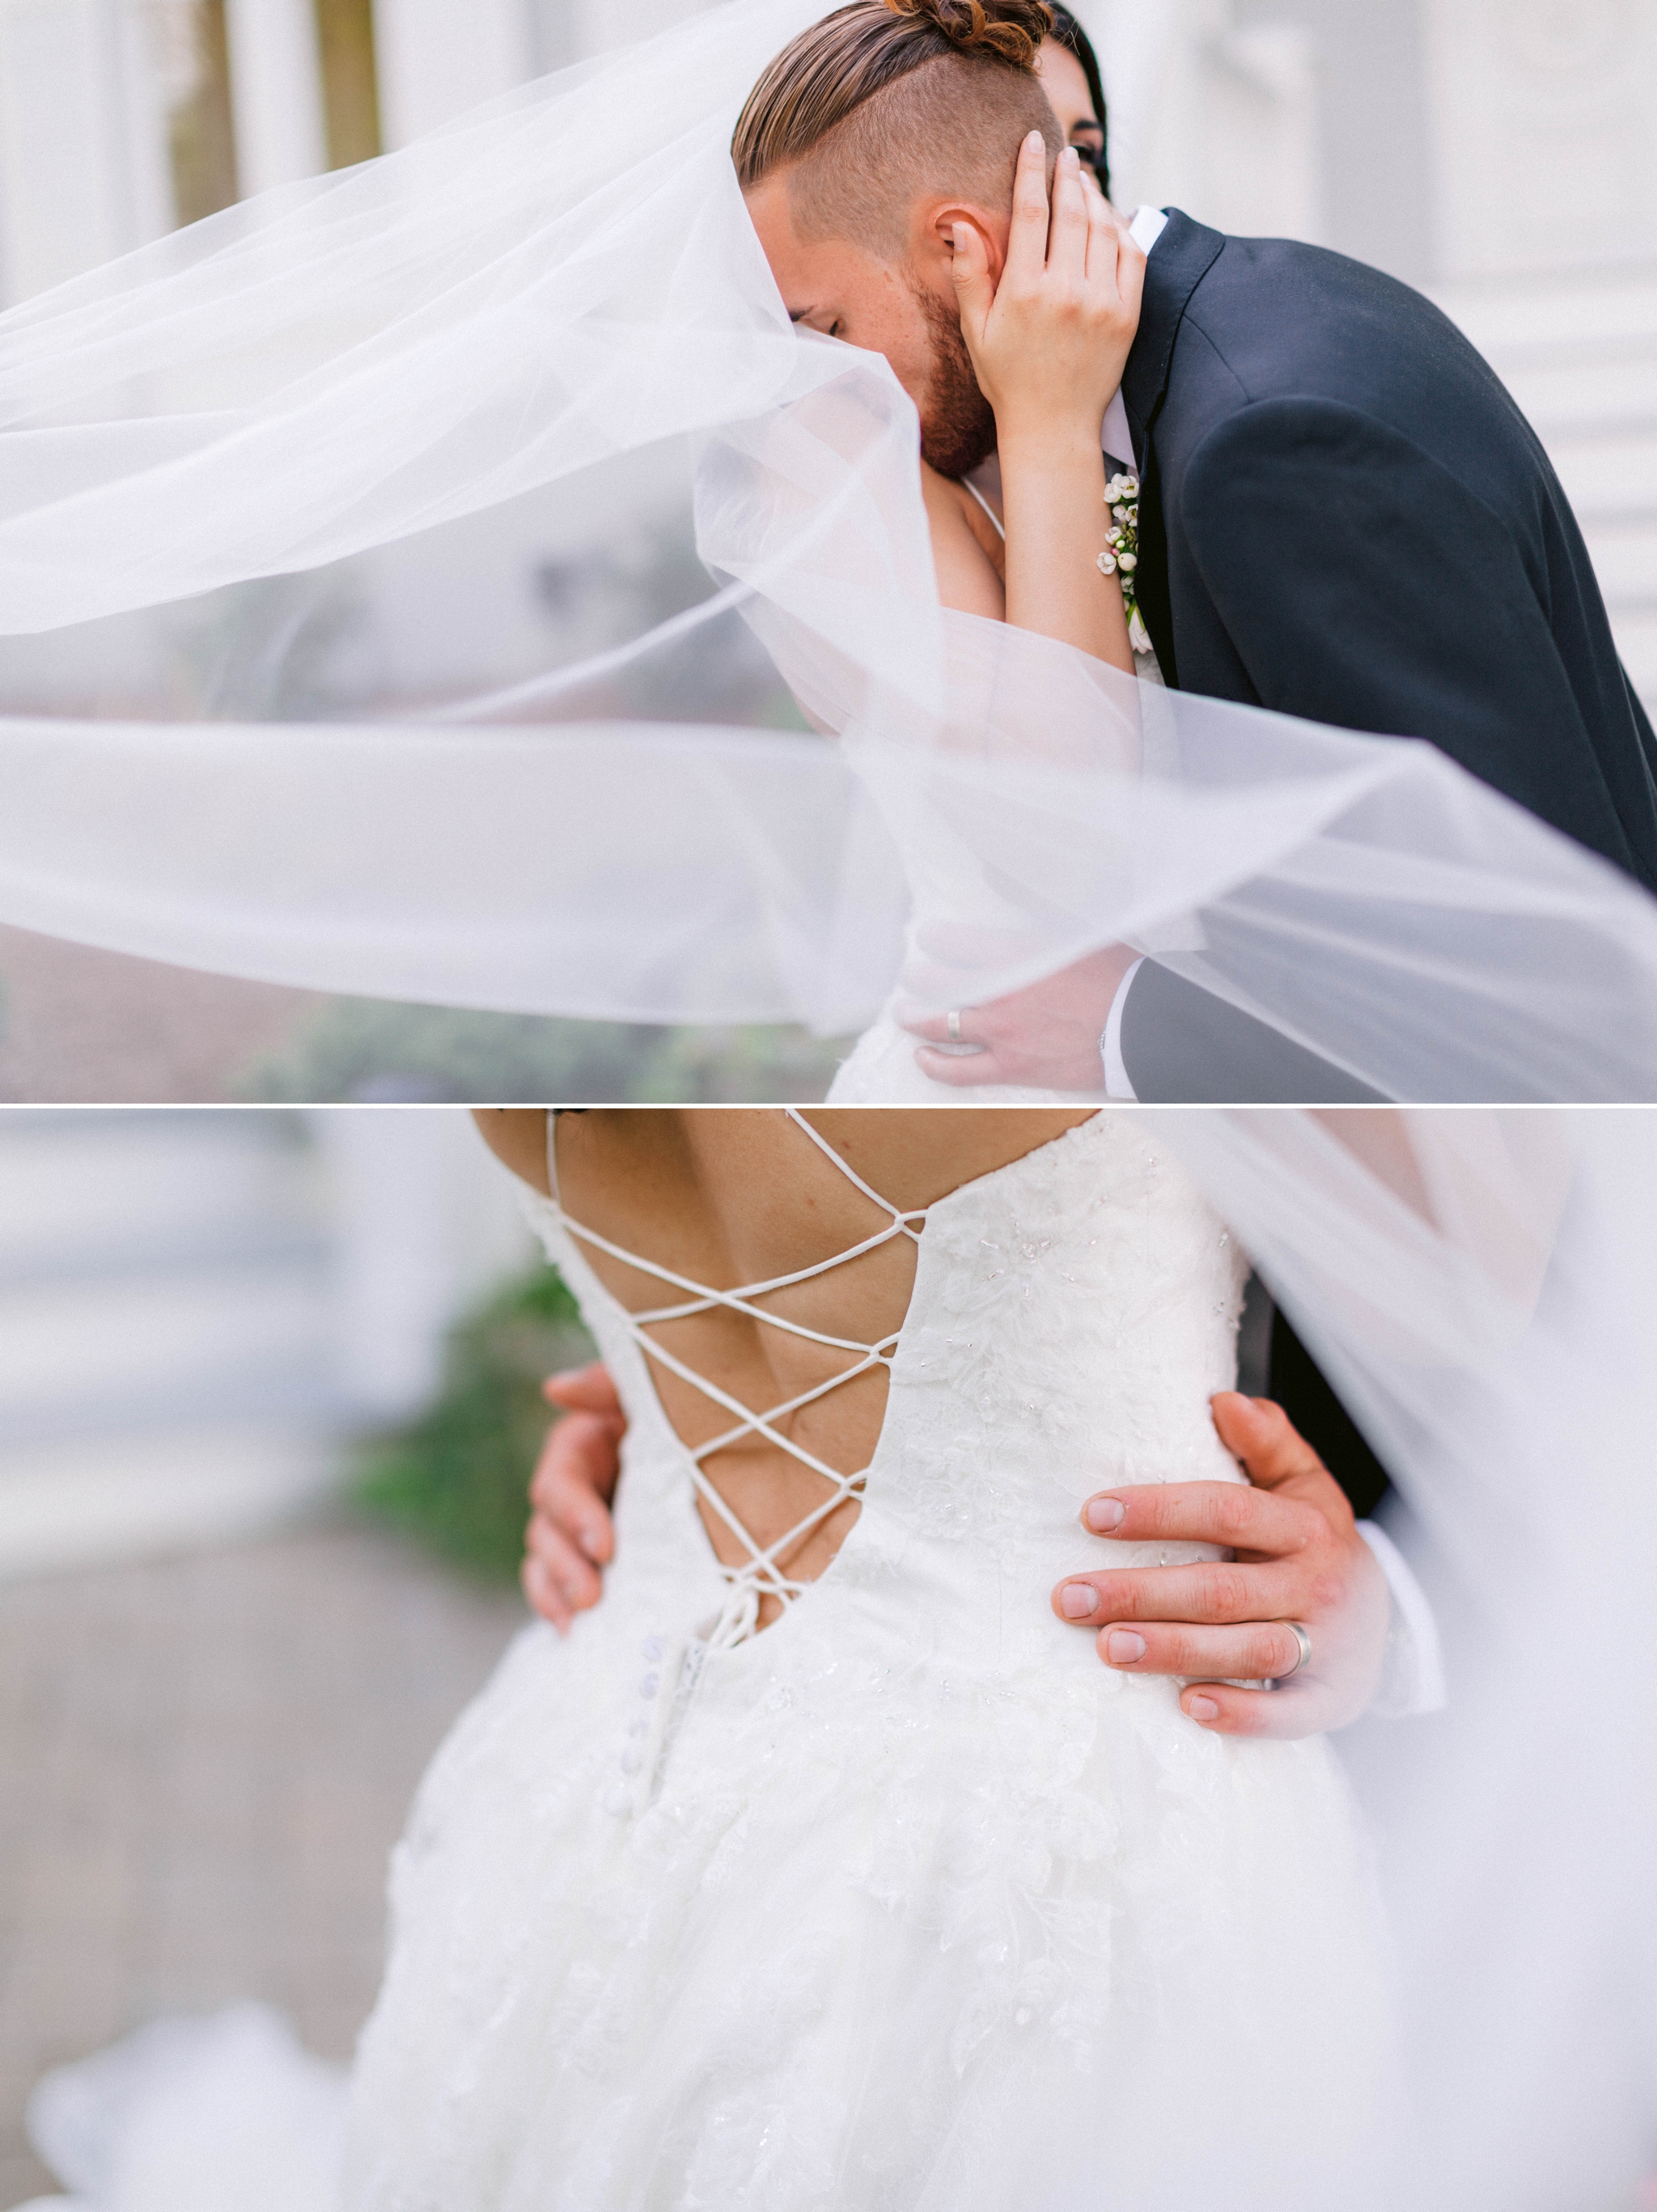  Veil shot - Wedding Portraits on the front porch of an all white luxury estate - Bride is wearing a Aline Ballgown by Cherish by Southern Bride with a long cathedral veil - Groom is wearing a black suit by Generation Tux and has a man bun - Fine Art